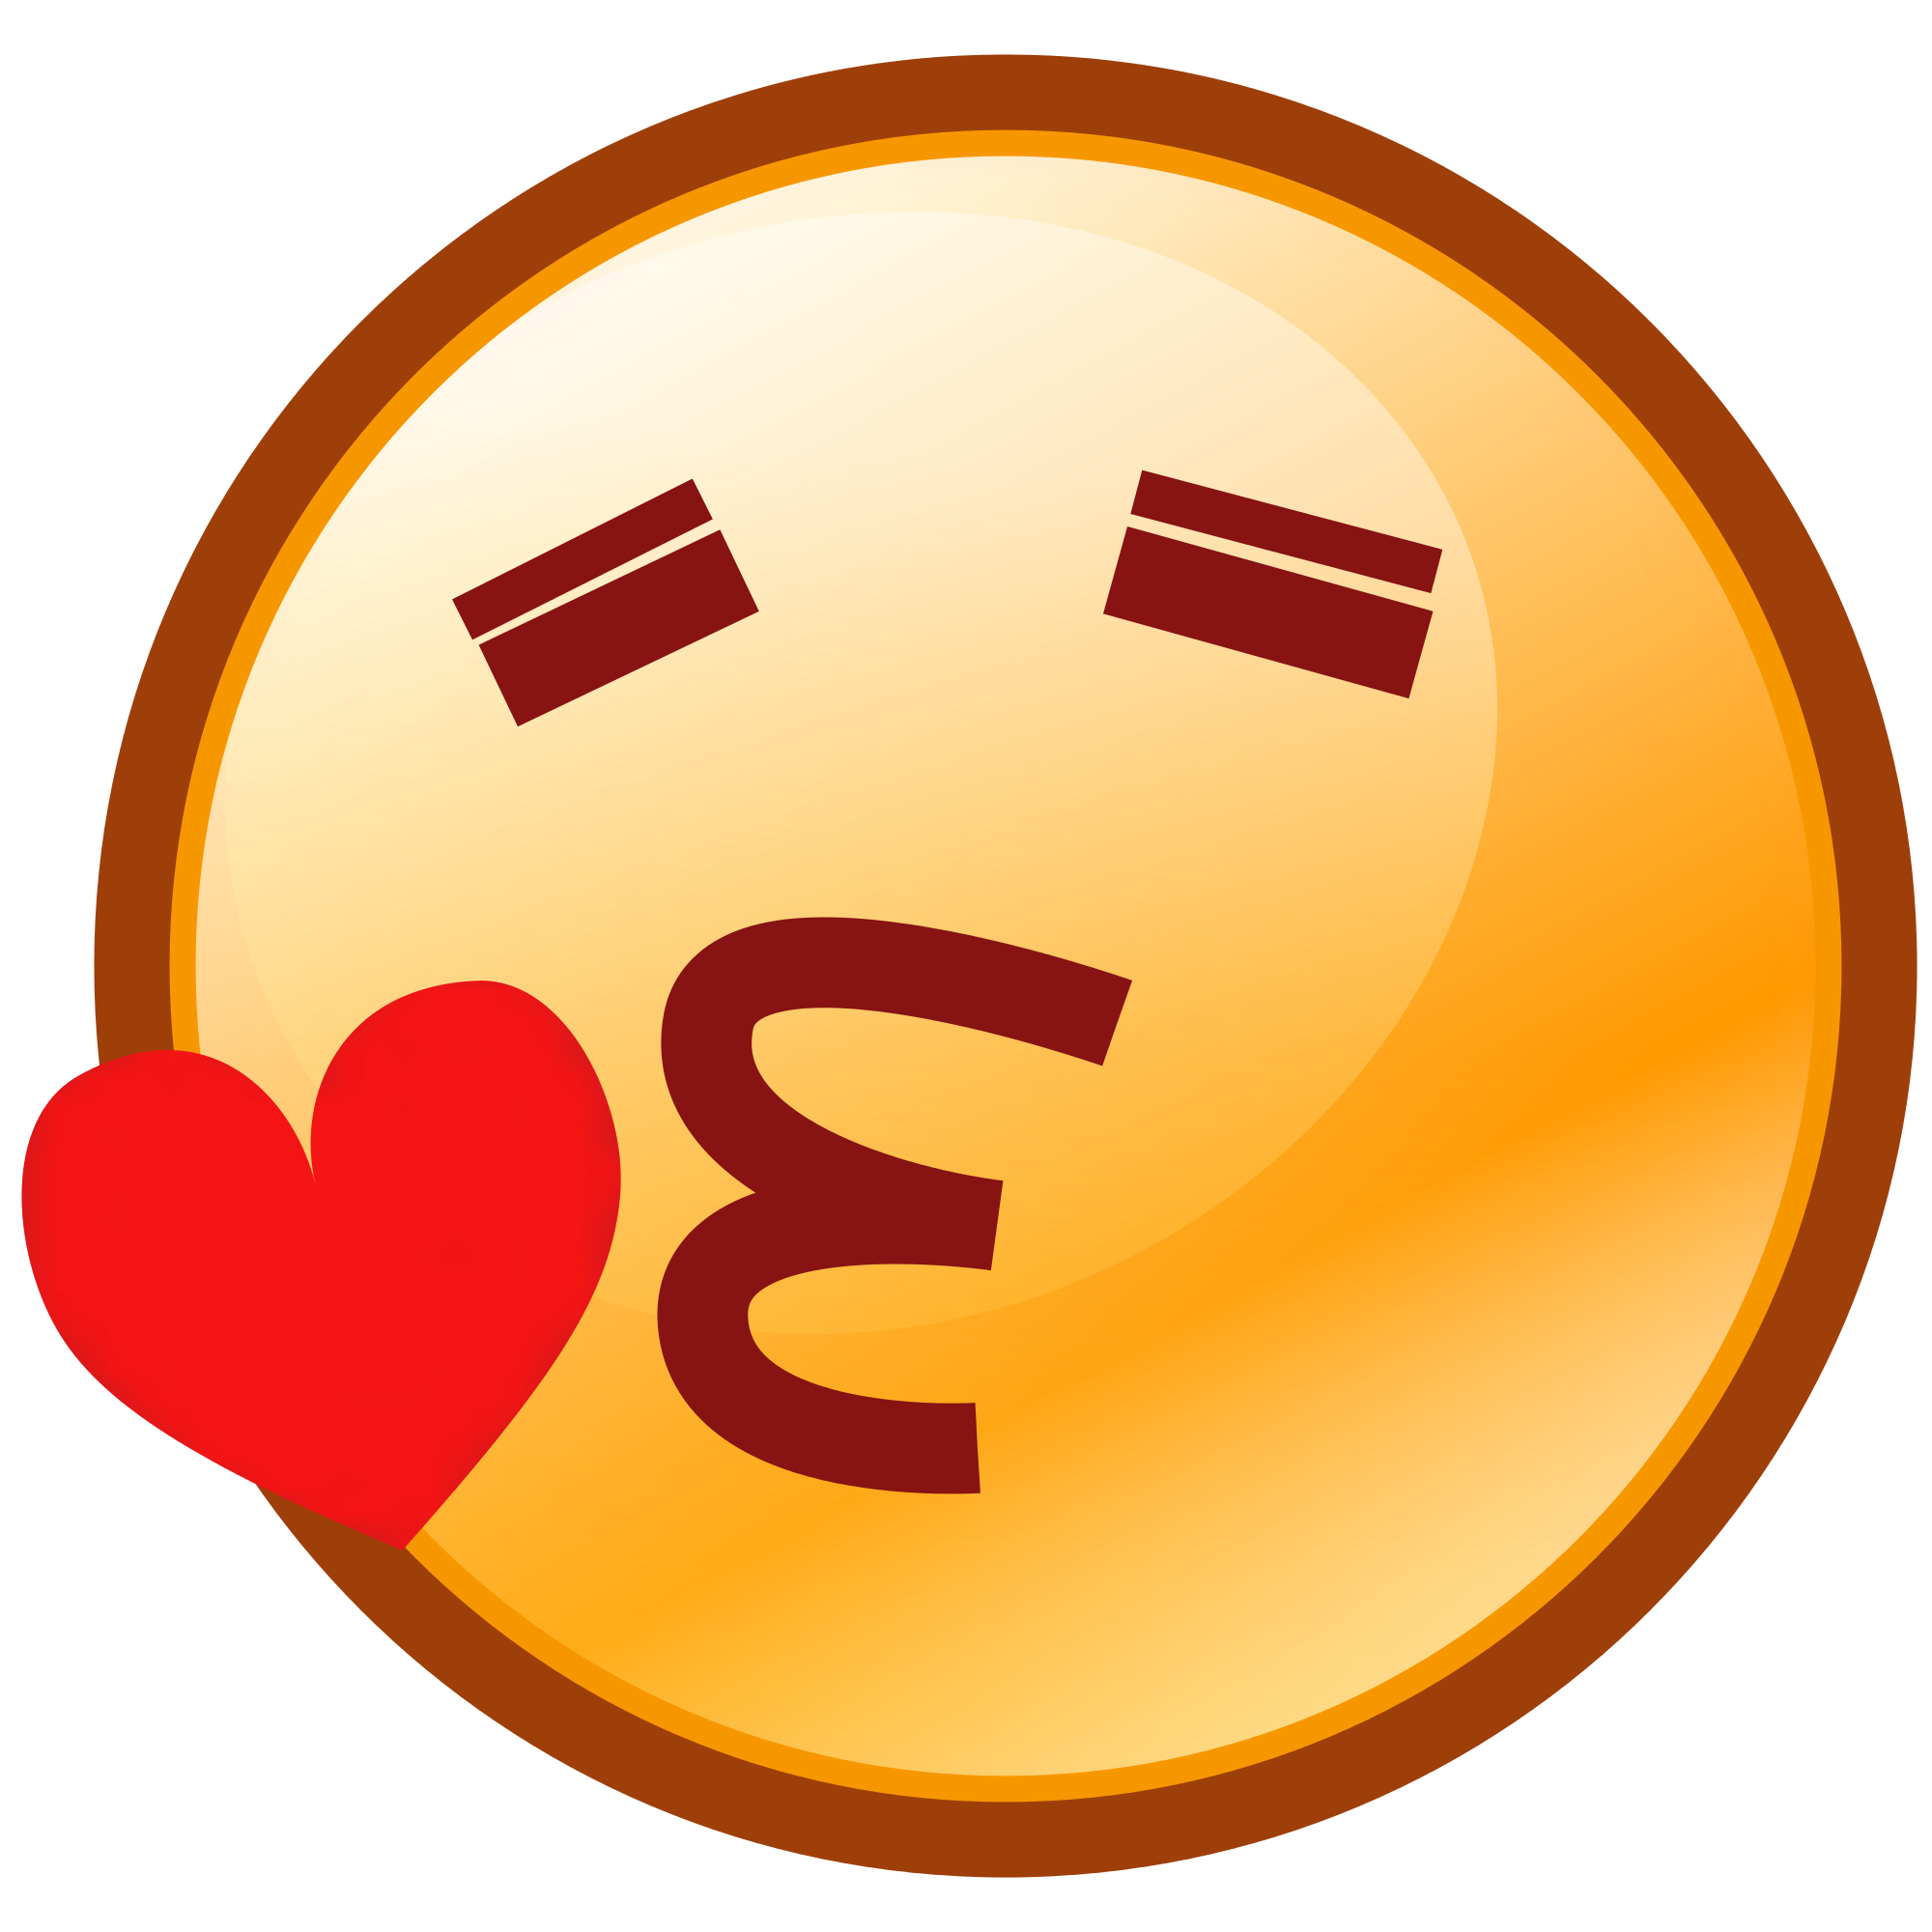 File:PEO-smiley kissing heart.svg